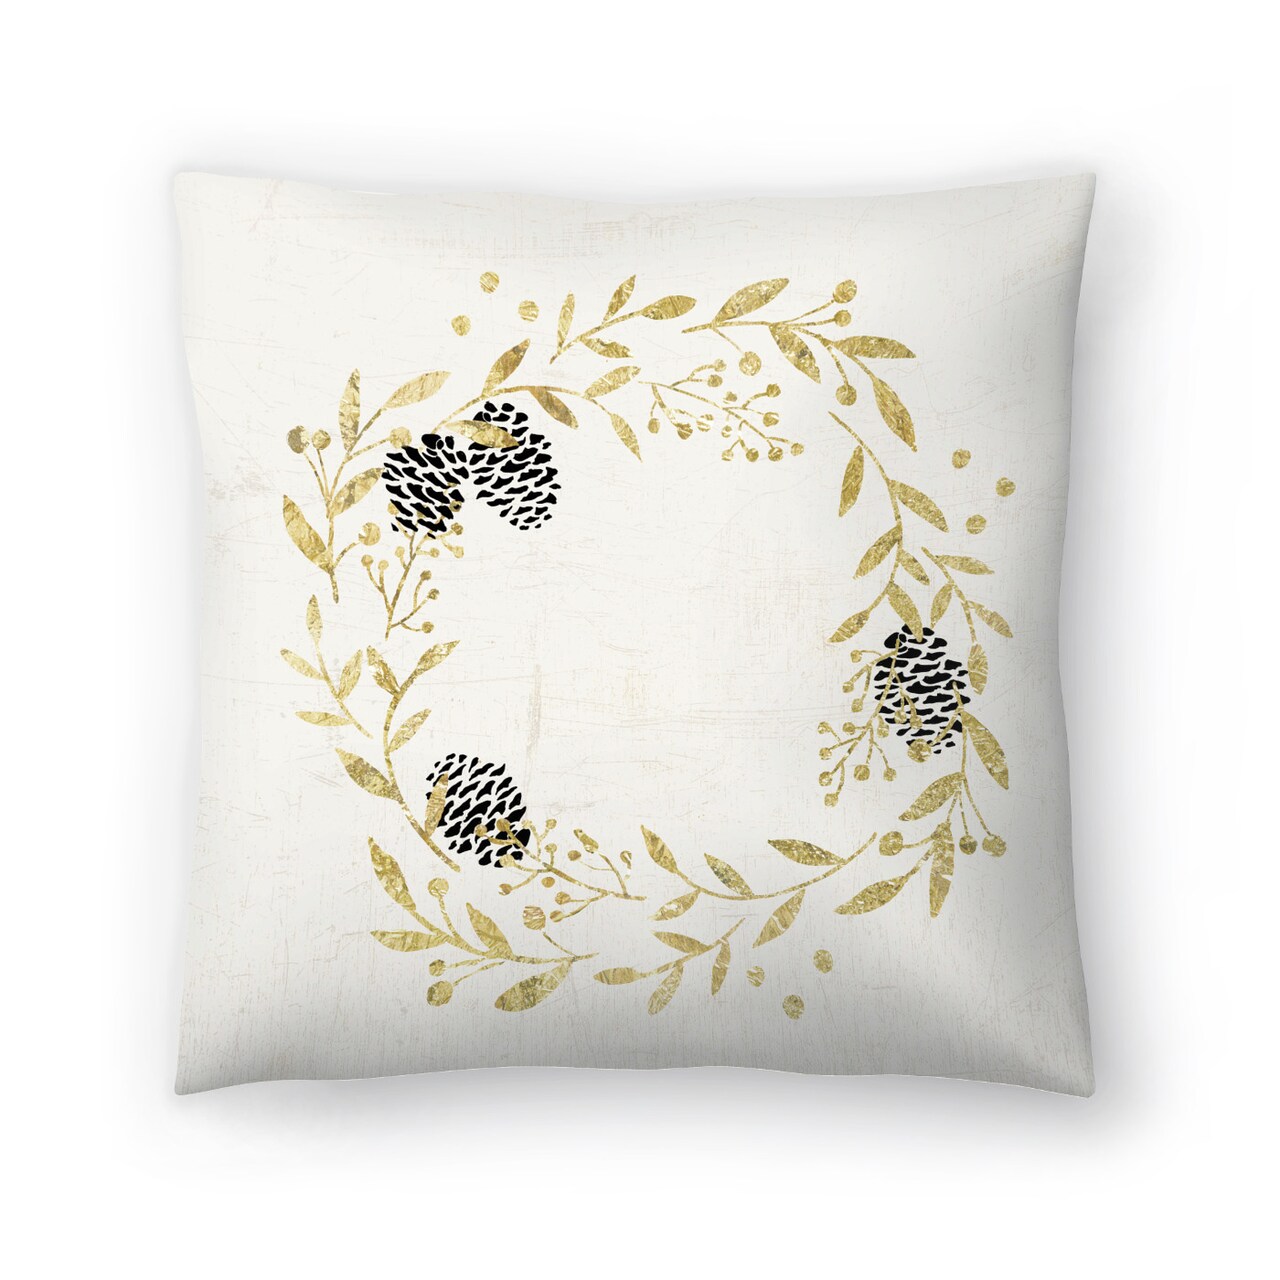 Golden Wreath by Pi Holiday Throw Pillow Americanflat Decorative Pillow